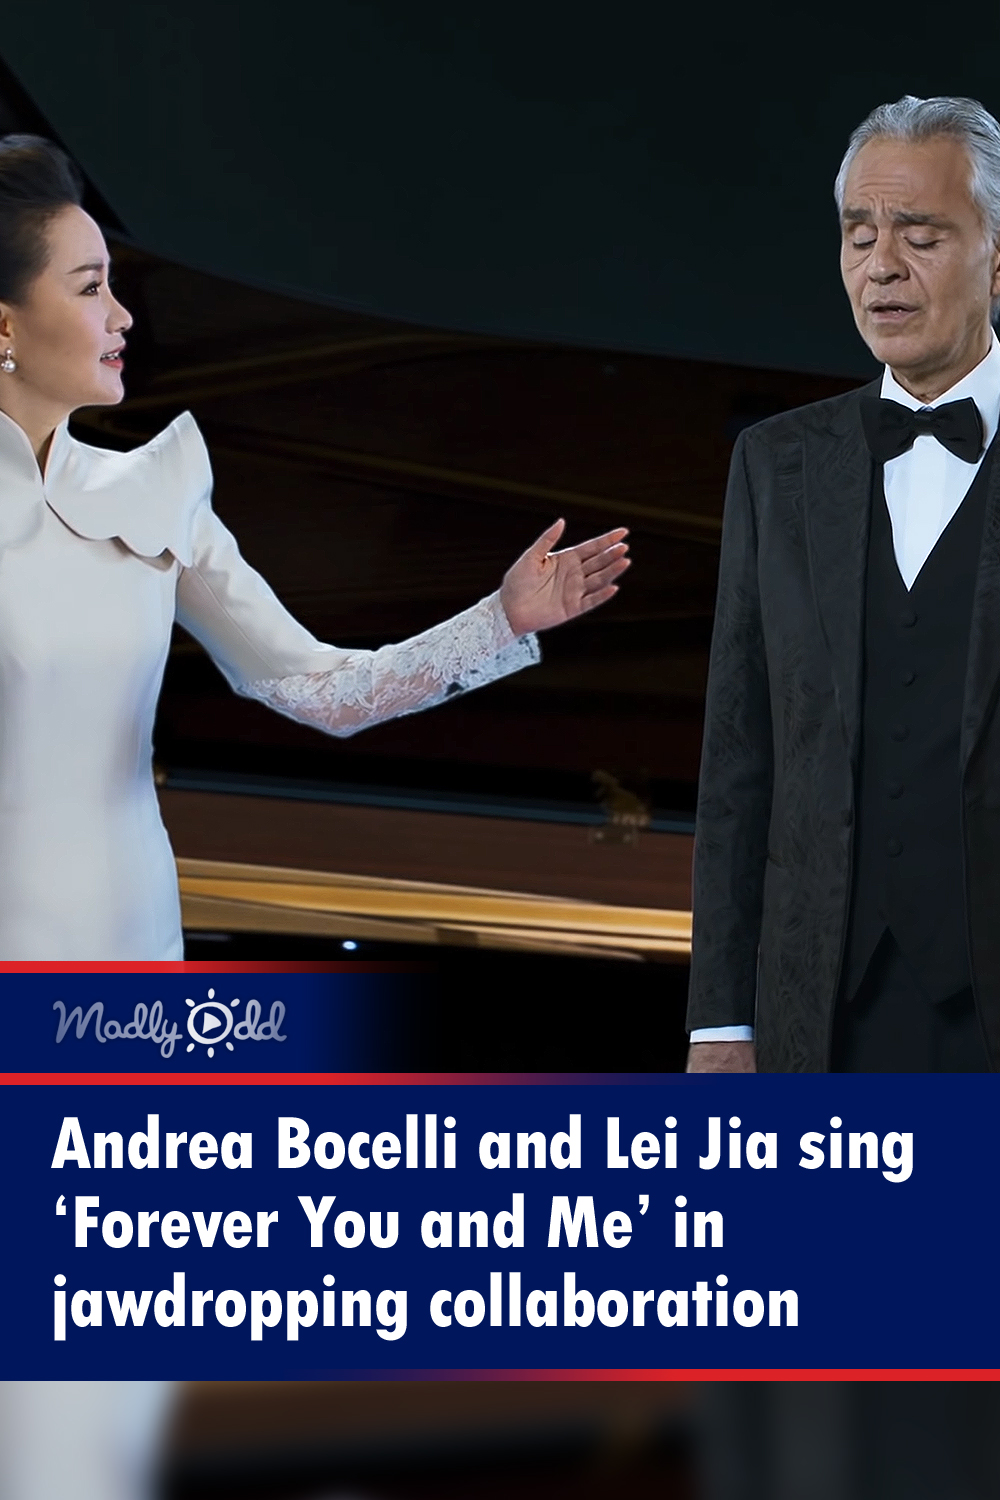 Andrea Bocelli and Lei Jia sing \'Forever You and Me\'